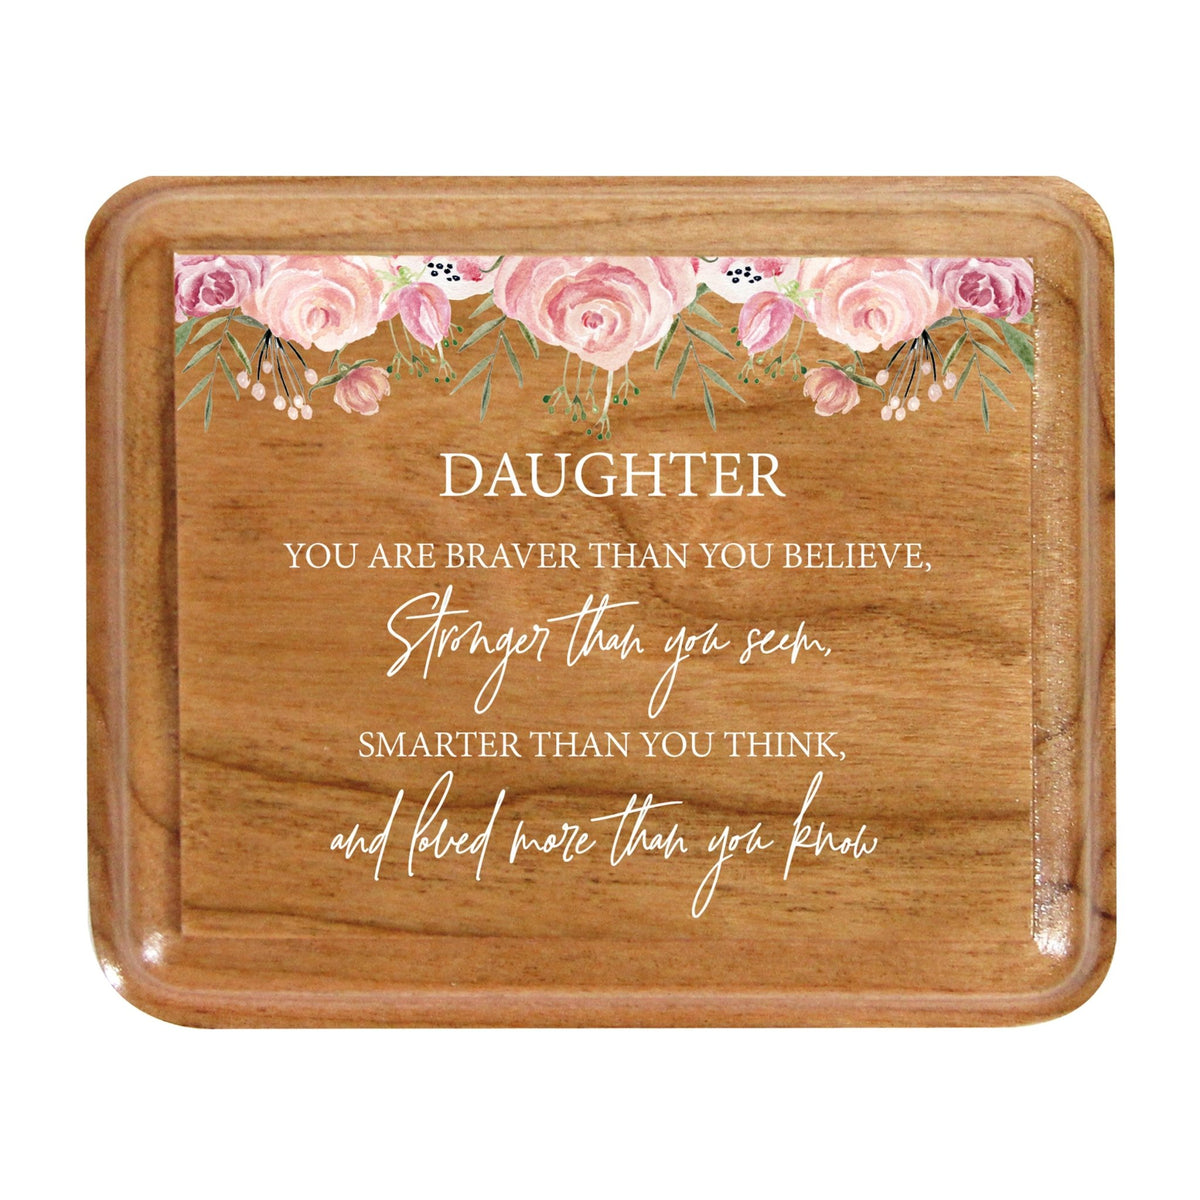 Modern Keepsake Box Inspirational Quotes for Daughter 3.5x3 Daughter, You Are Braver - LifeSong Milestones